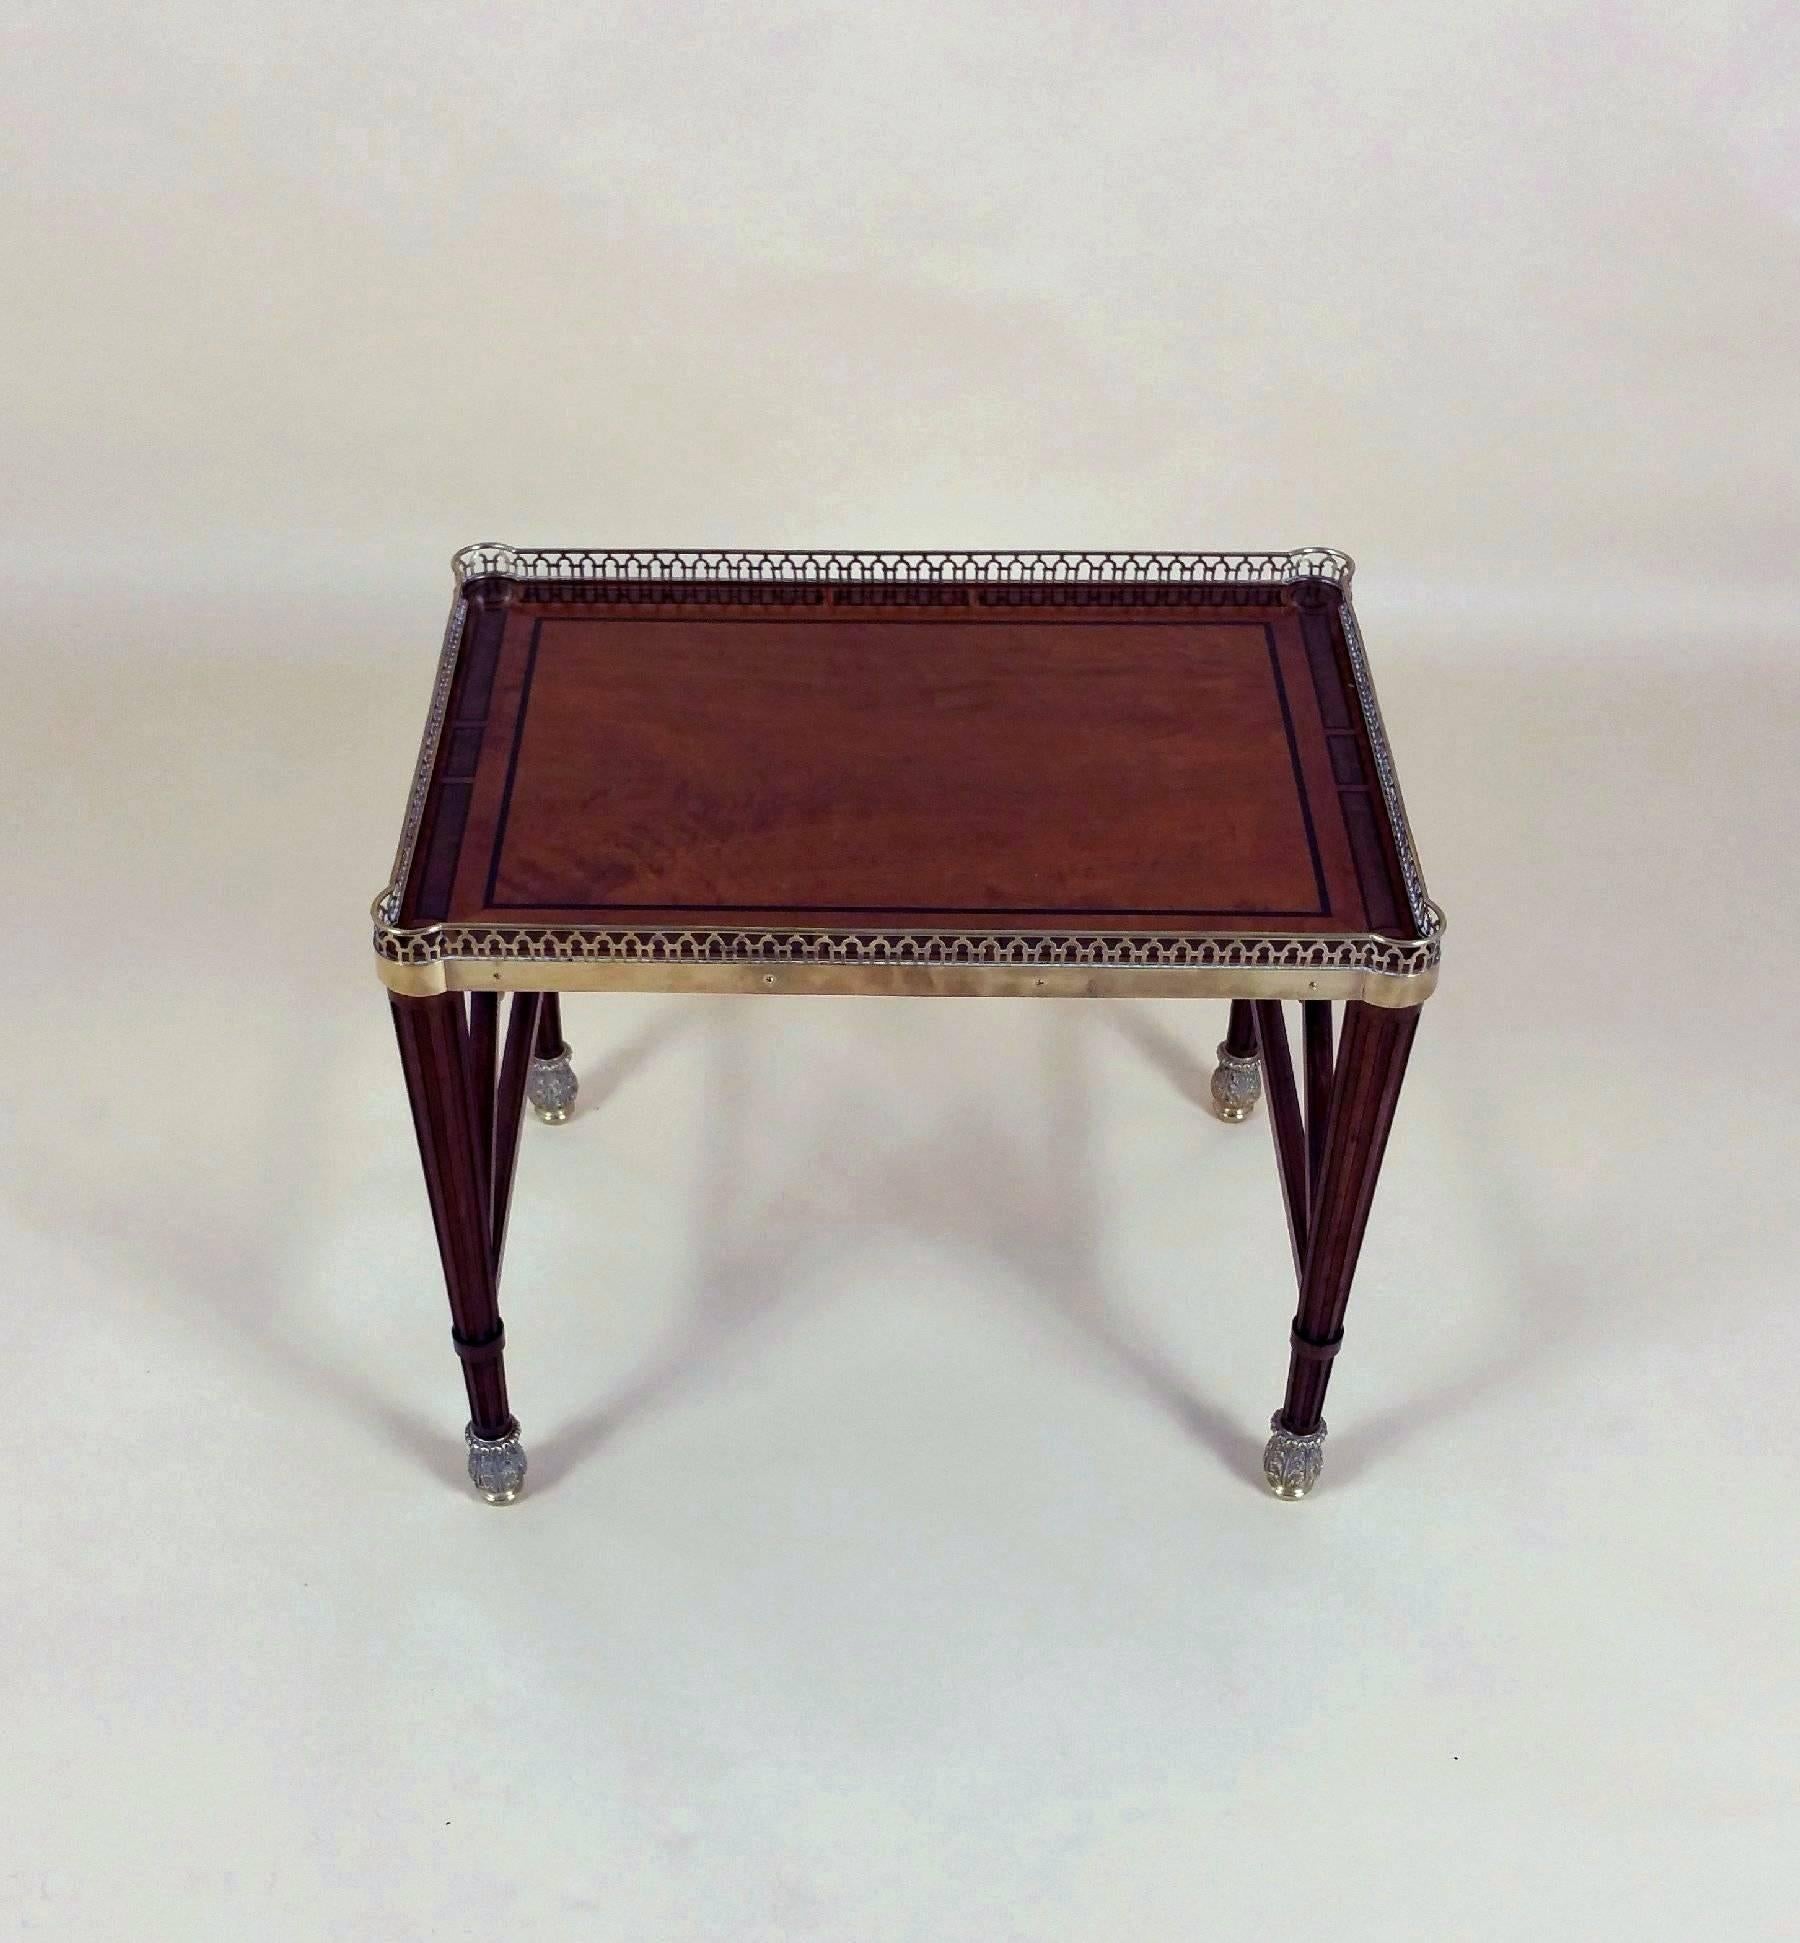 This attractive French satinwood low table was designed by Paul Sormani and is circa 1900. It is inlaid with purple heart and features very decorative ormolu mounts, monogrammed P.S. The table measures 21 ½ in – 54.6 cm wide by 15 ½ in – 39.4 cm